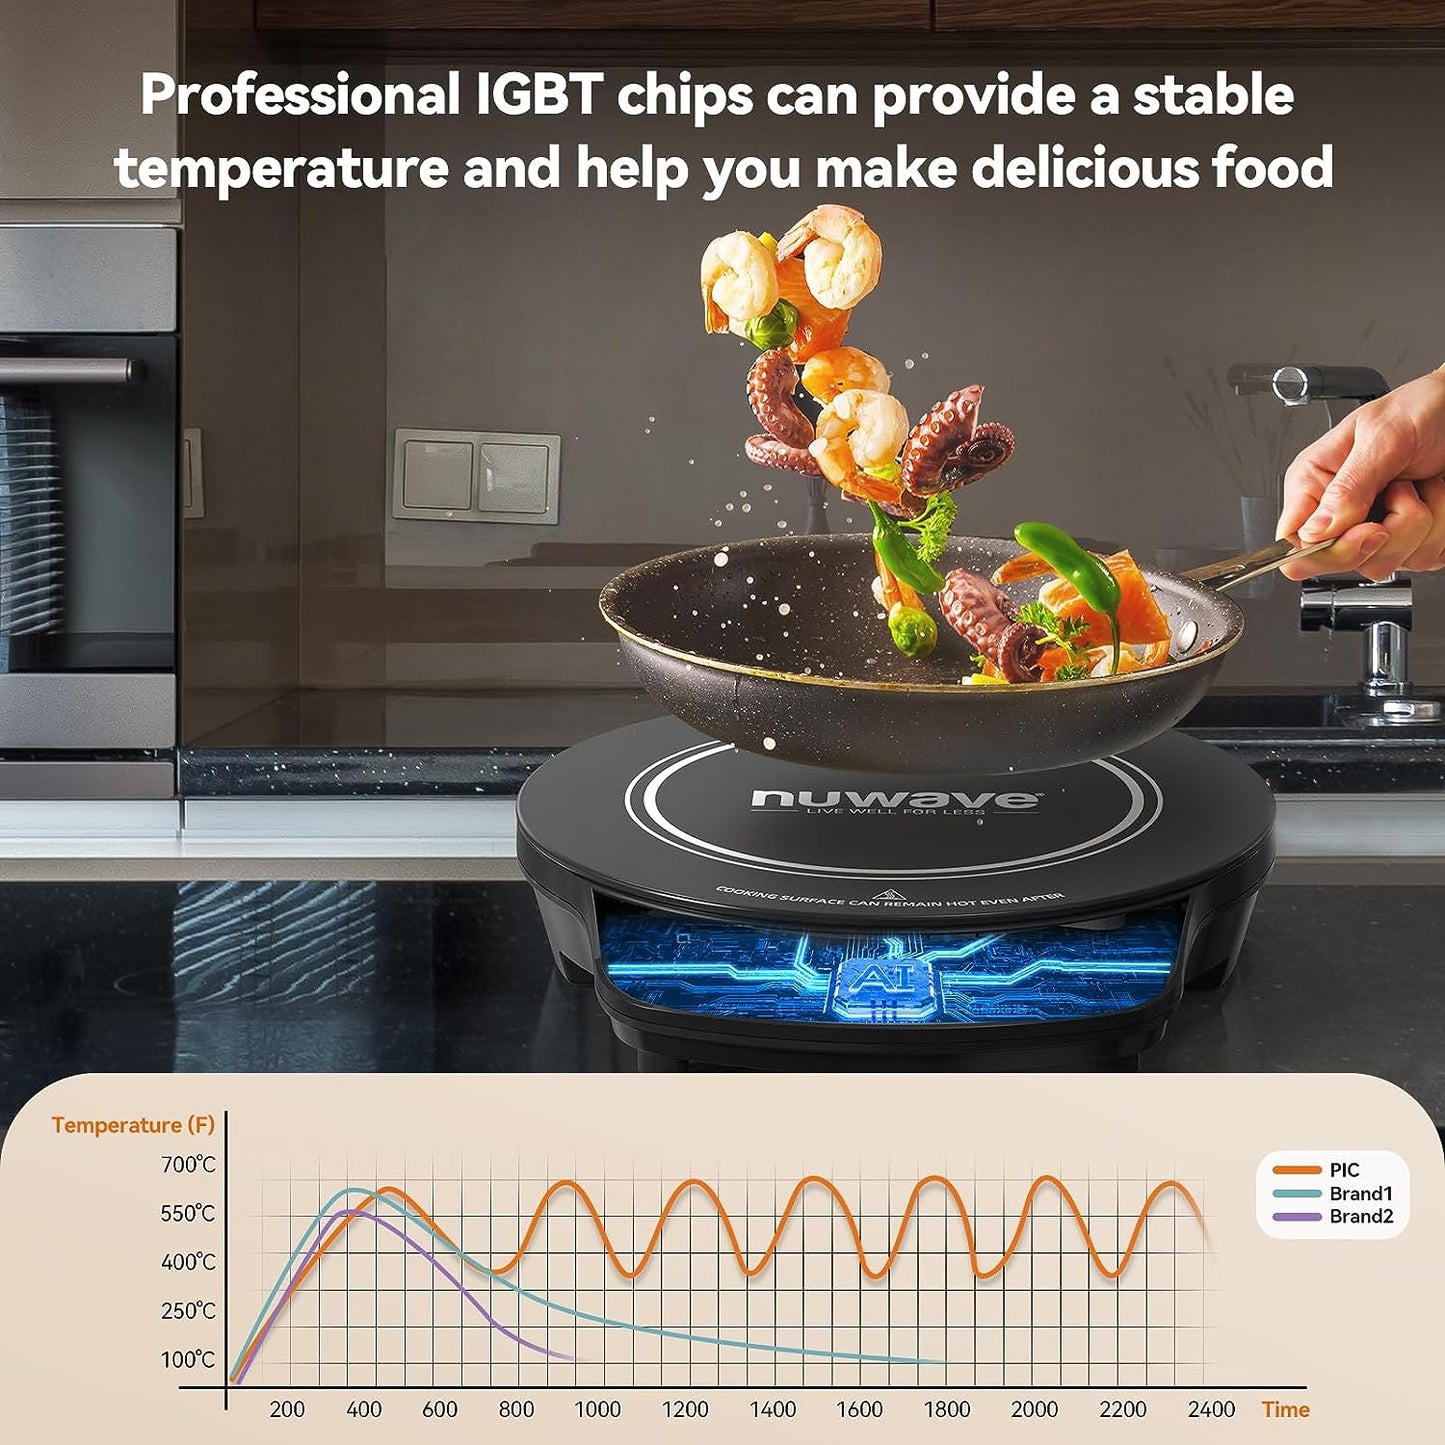 Flex Precision Induction Cooktop, 10.25” Shatter-Proof Ceramic Glass, 6.5” Heating Coil, 45 Temps from 100°F to 500°F, 3 Wattage Settings 600, 900 & 1300 Watts